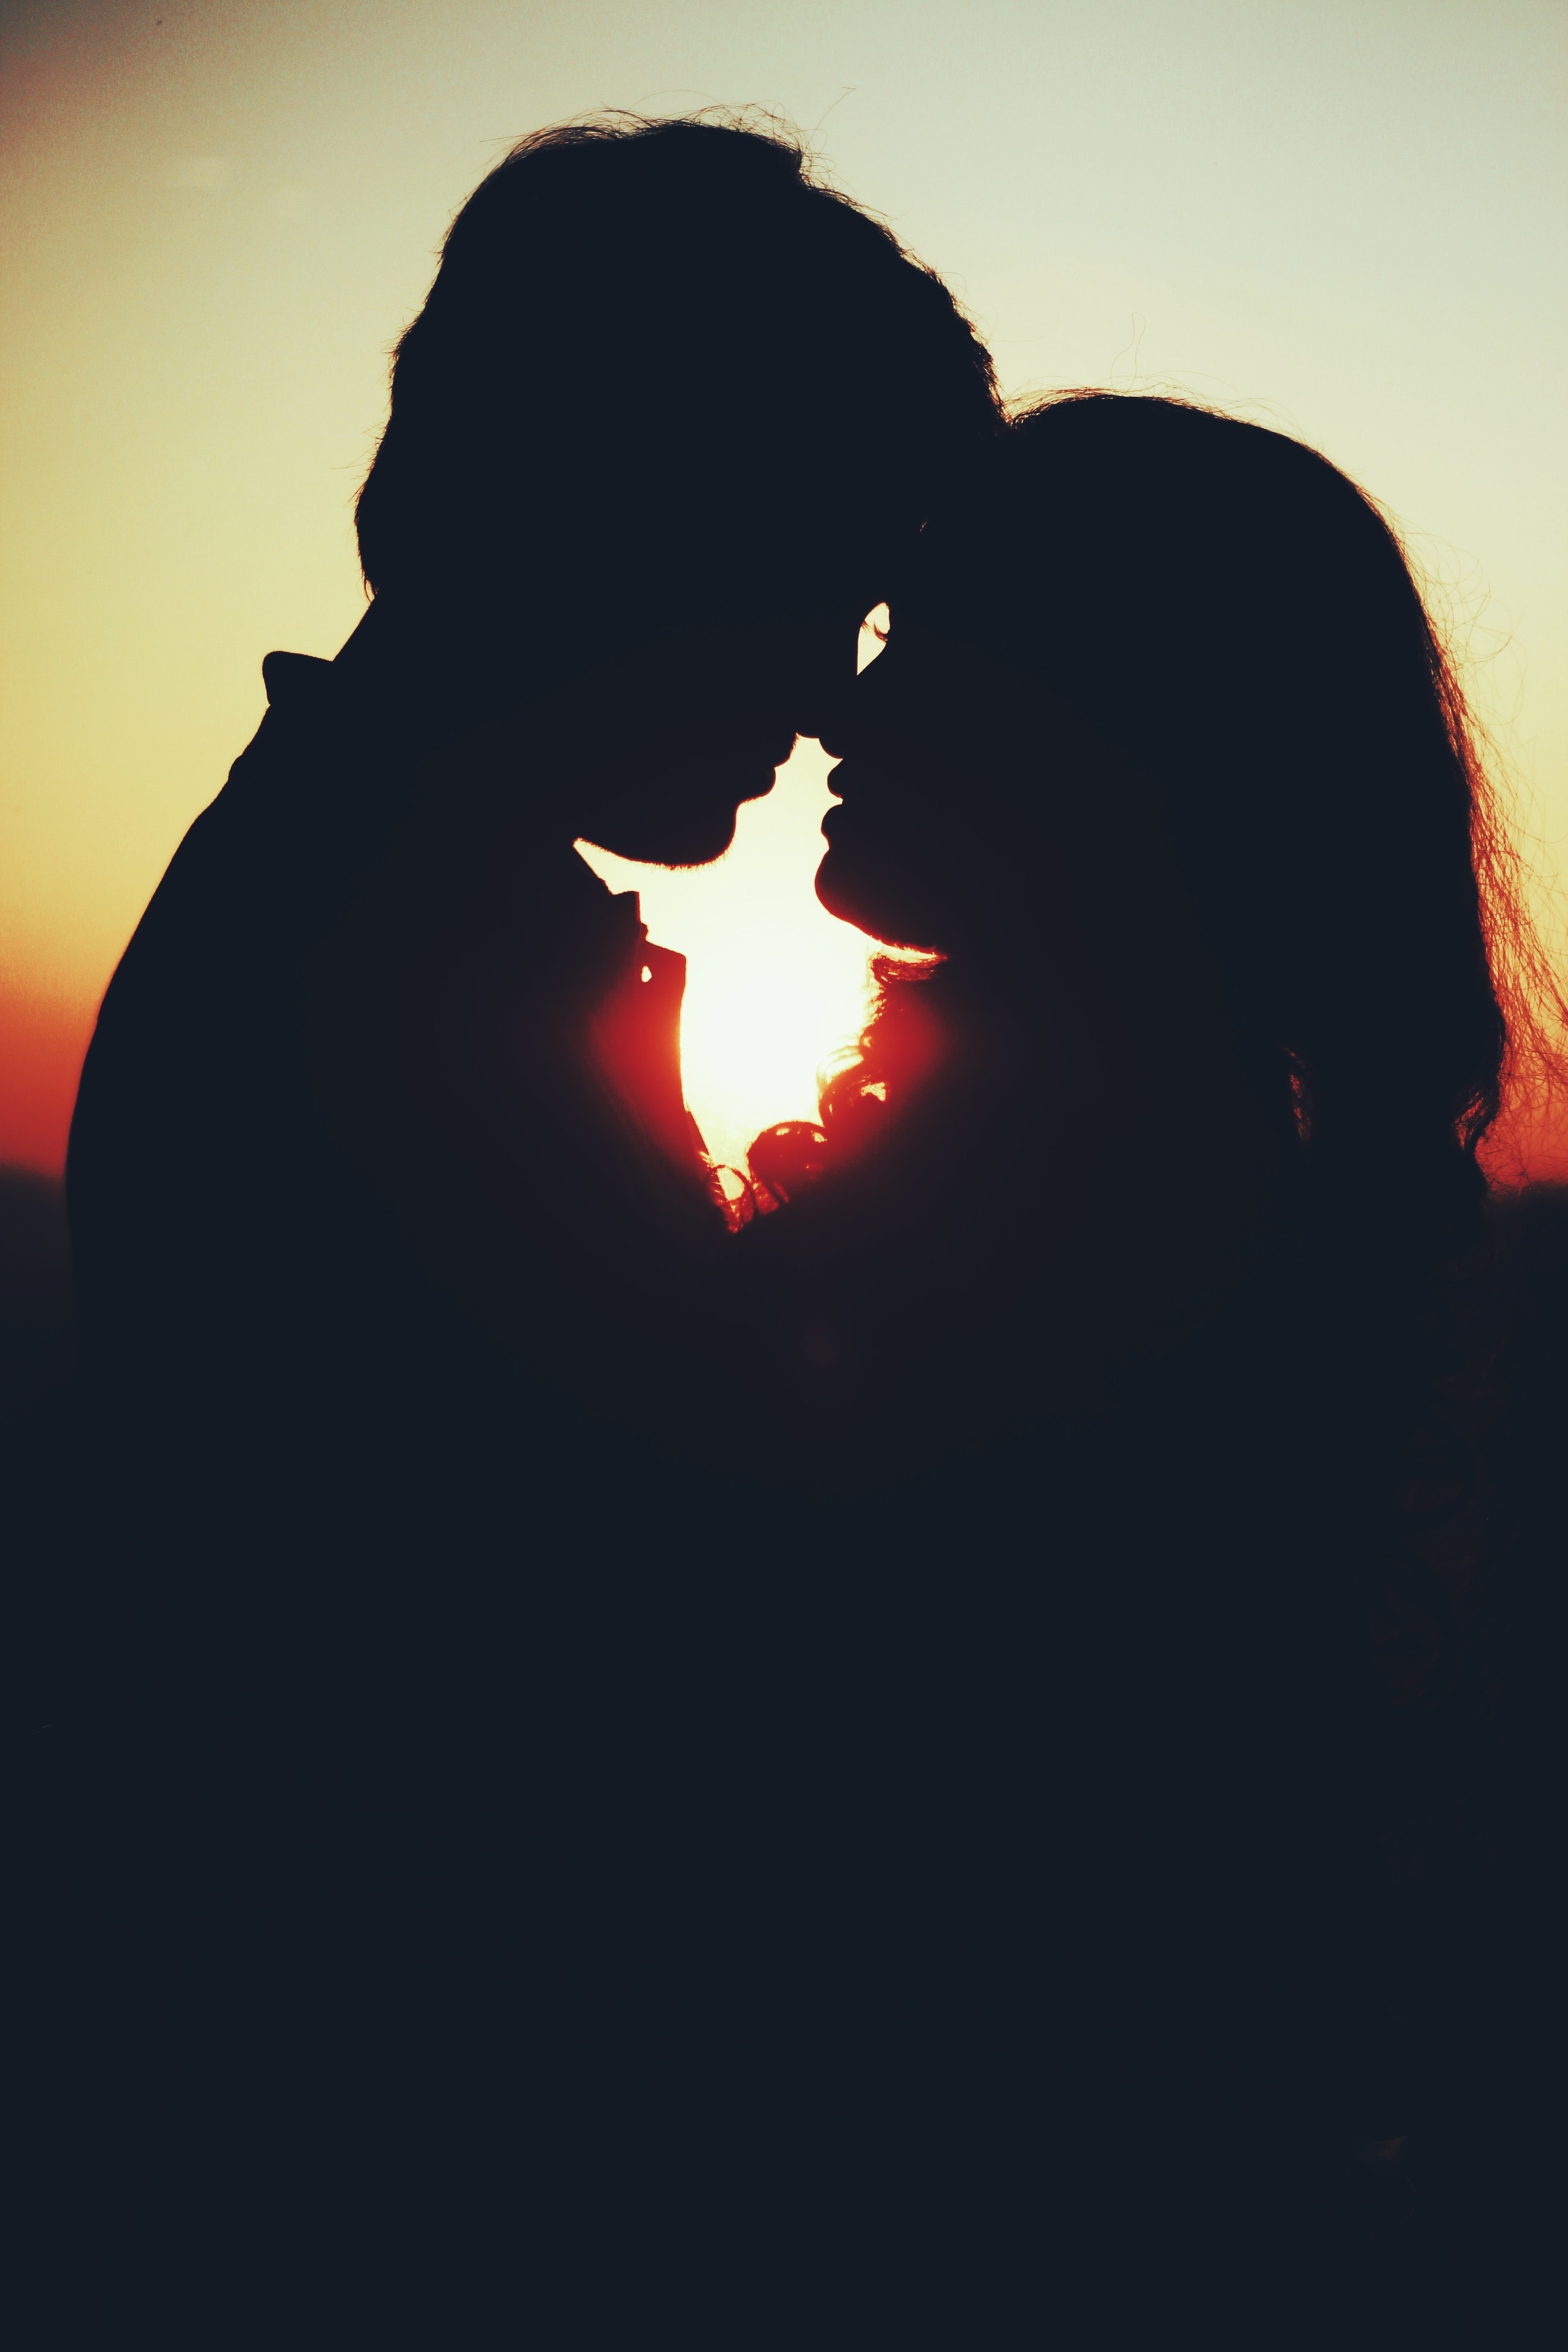 kissing silhouette photography